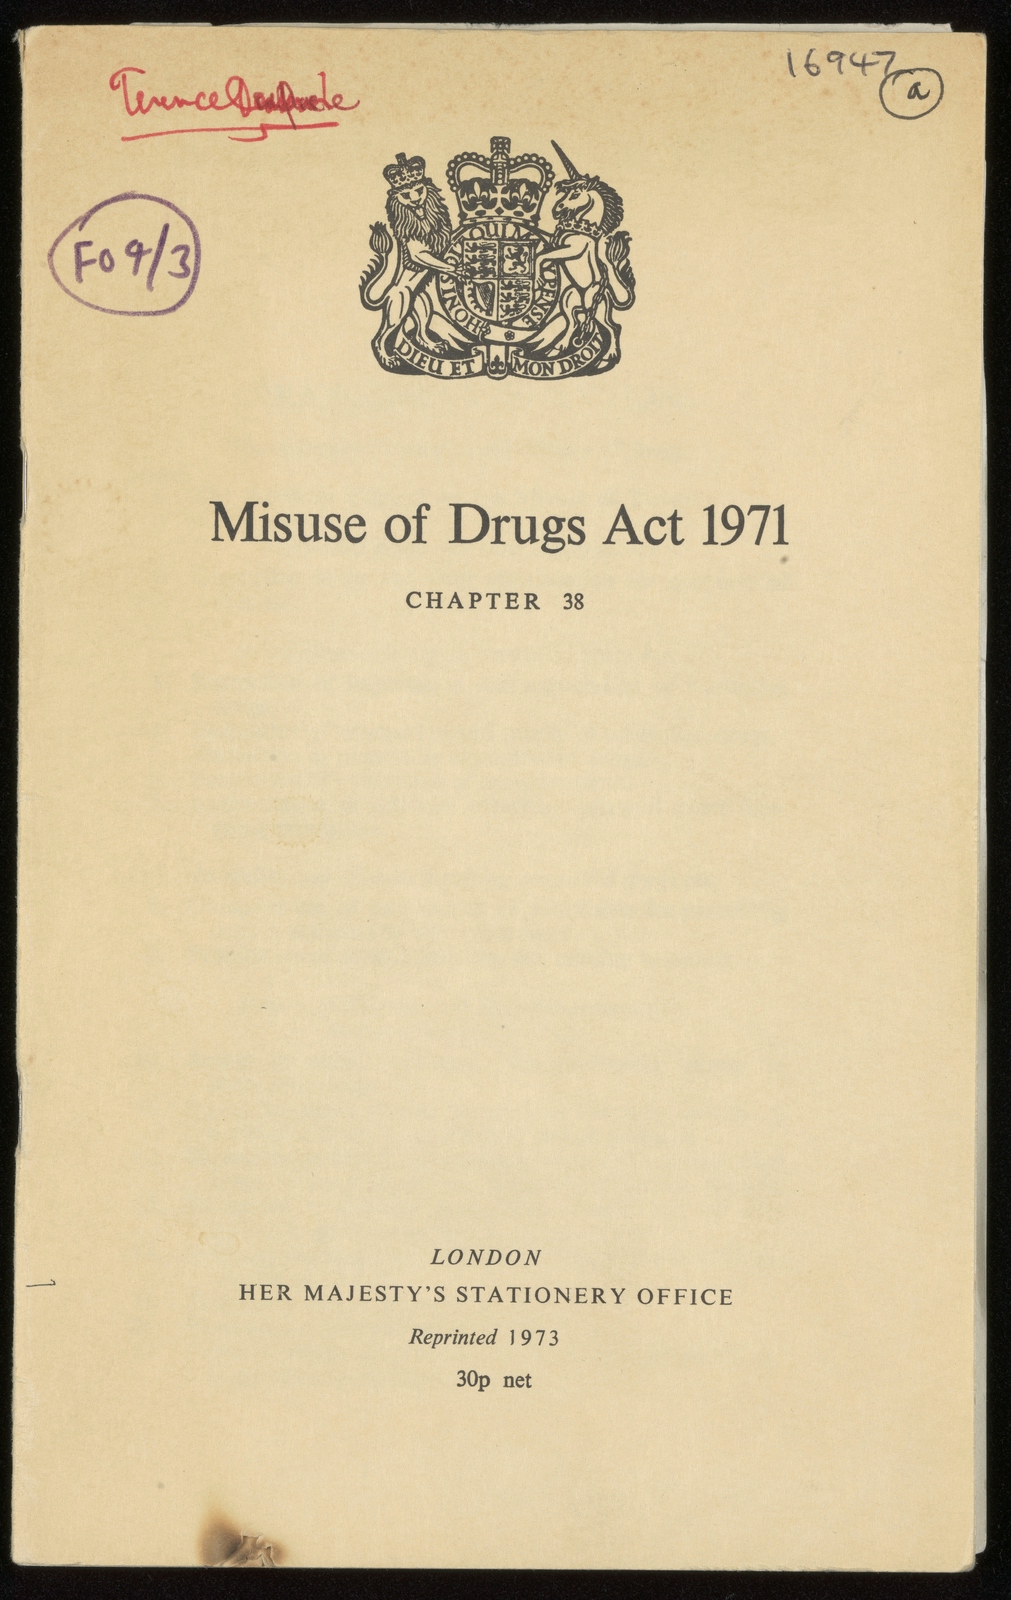 Front cover of the Misuse of Drugs Act 1971